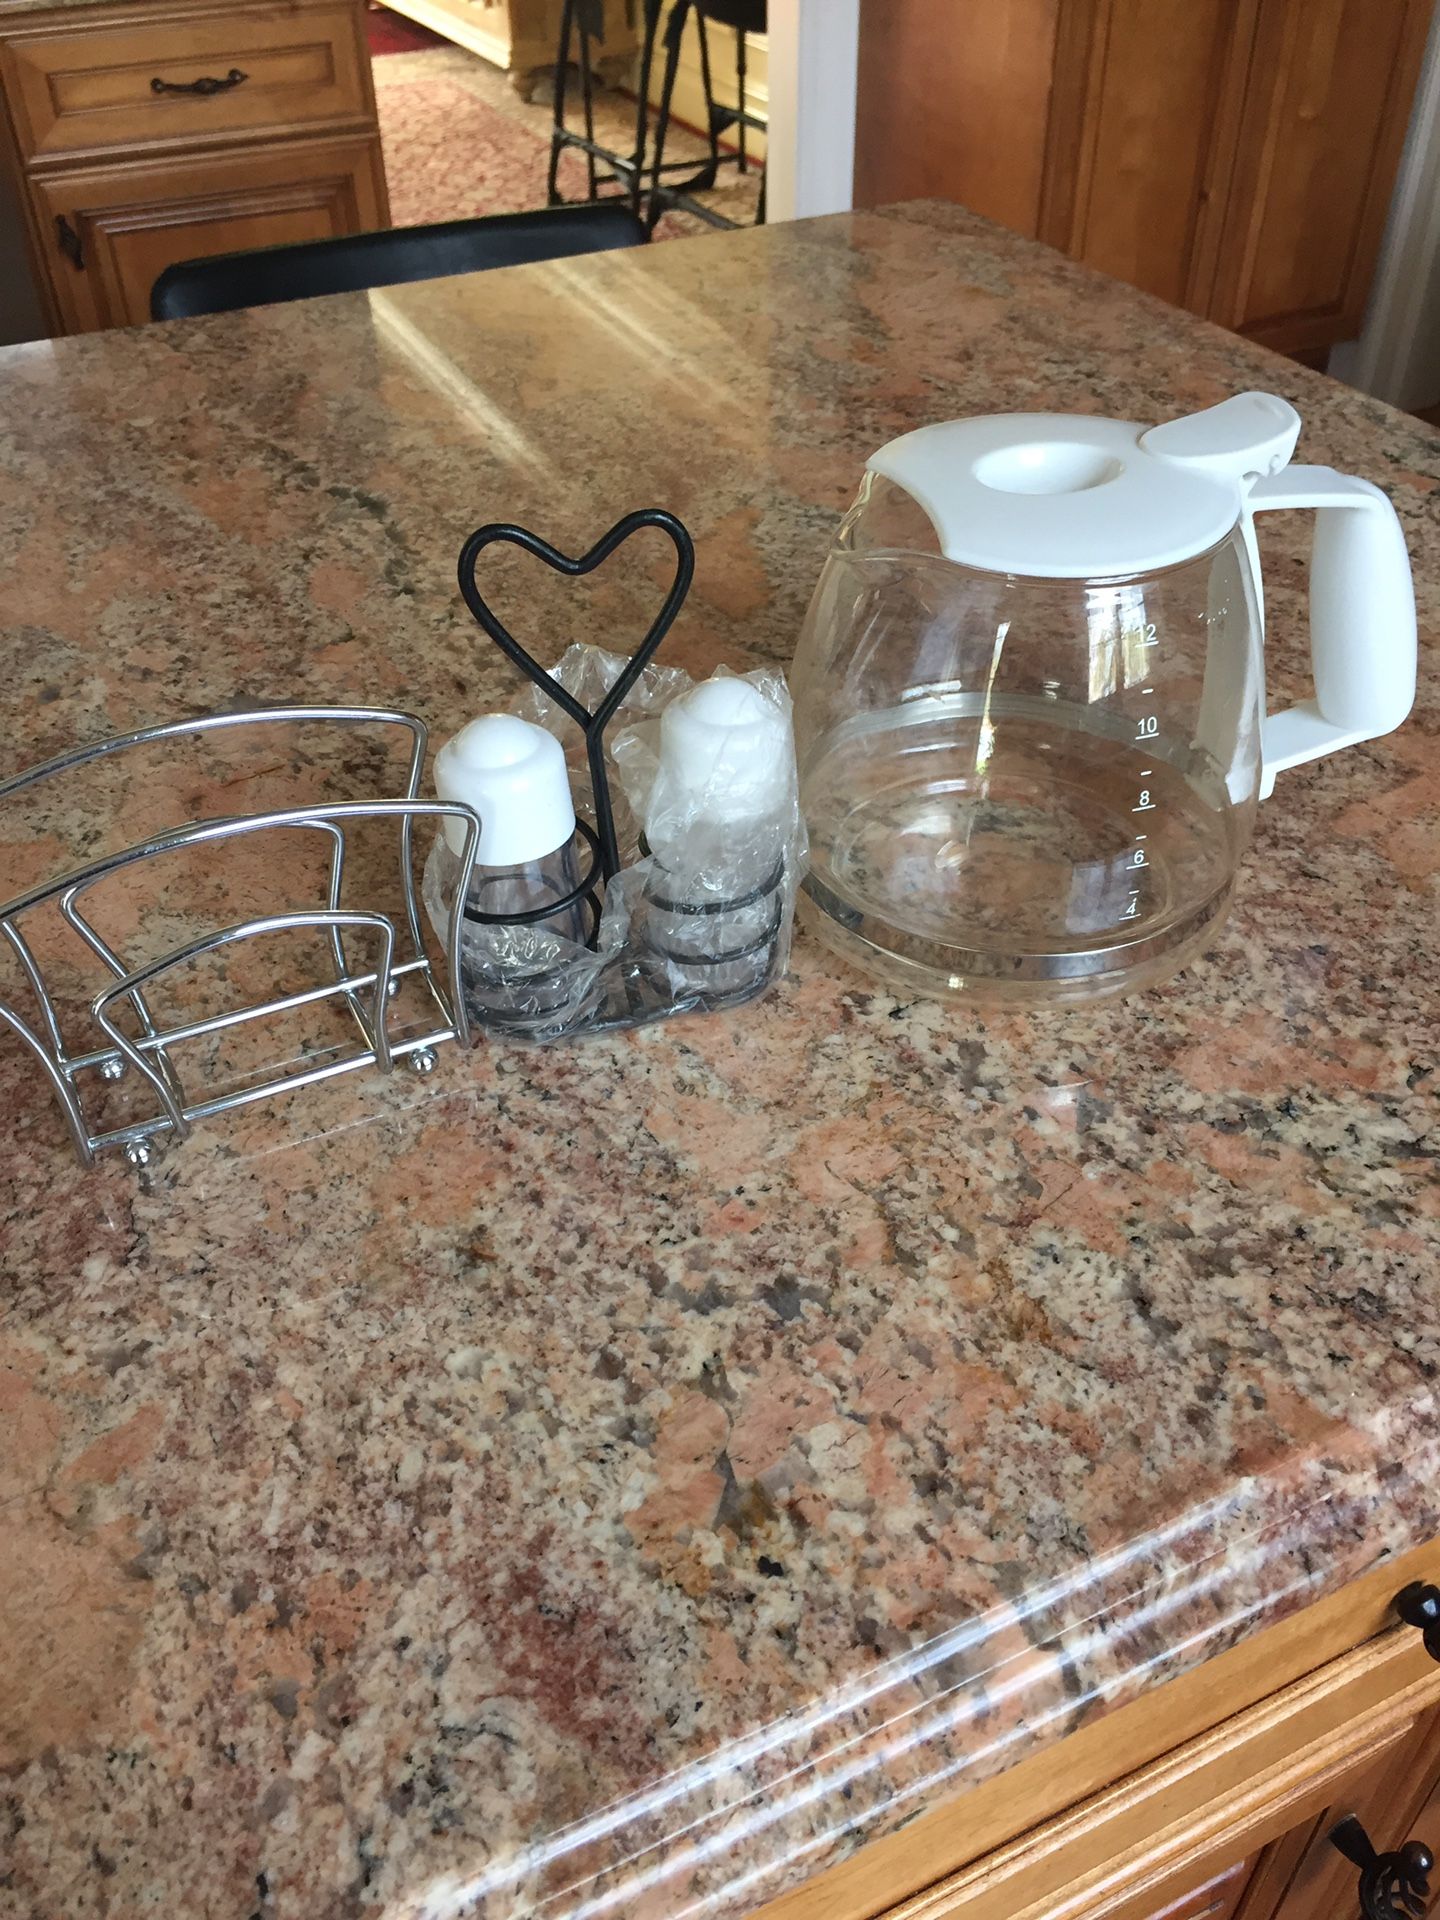 Coffee pot and shakers plus vases and glasses